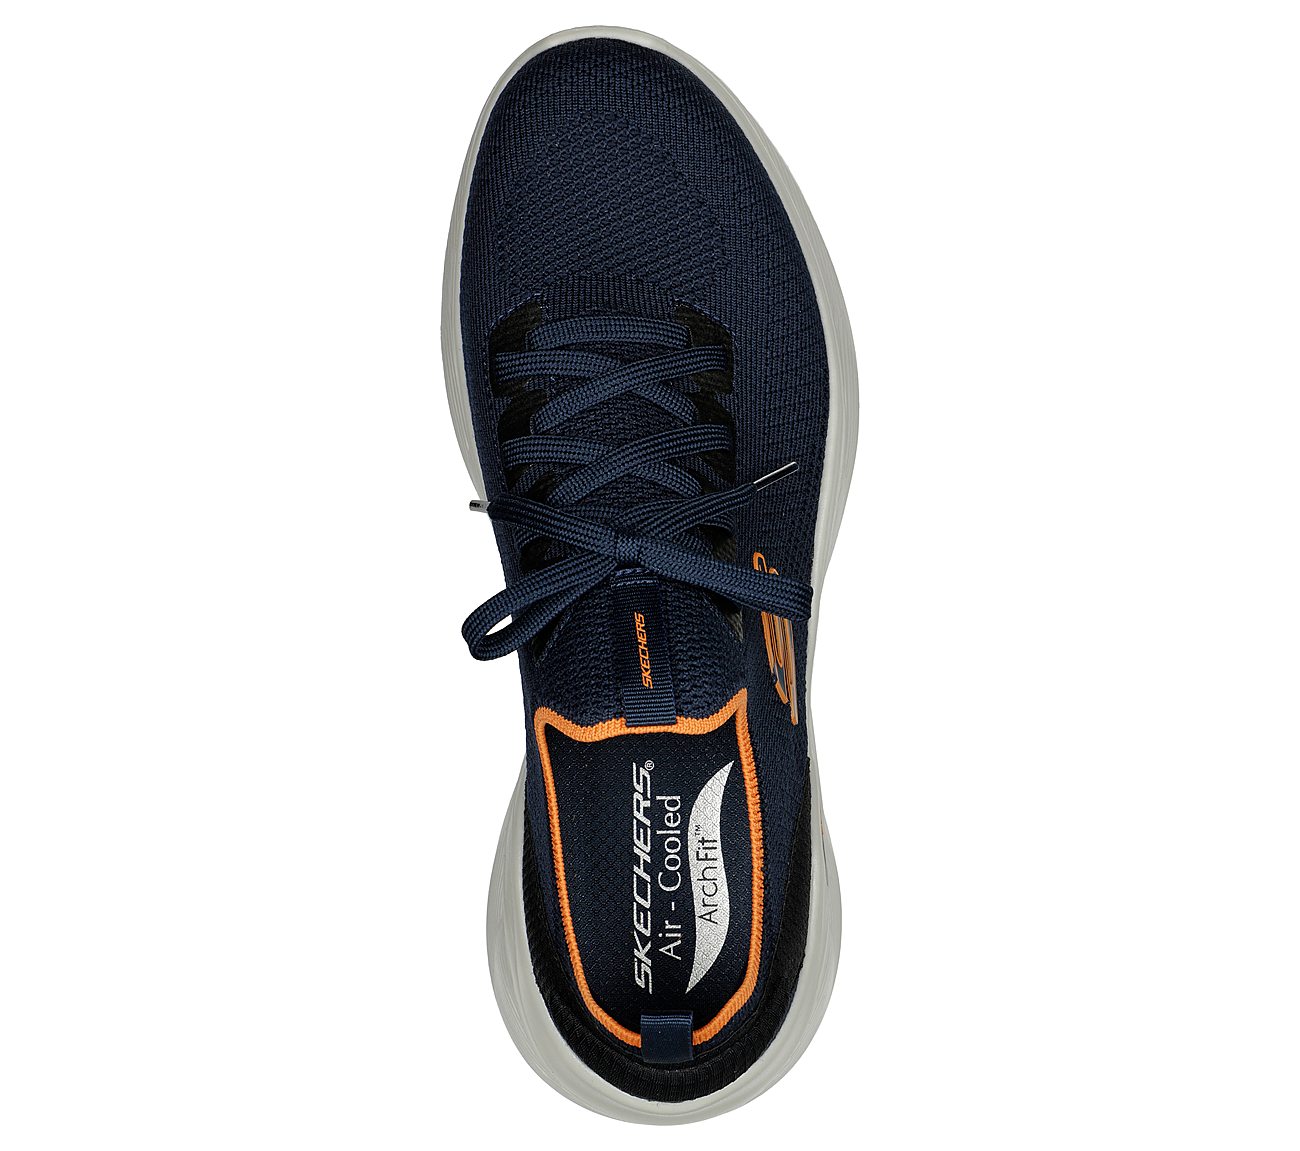 ARCH FIT INFINITY - STORMLIGH, NAVY/ORANGE Footwear Top View